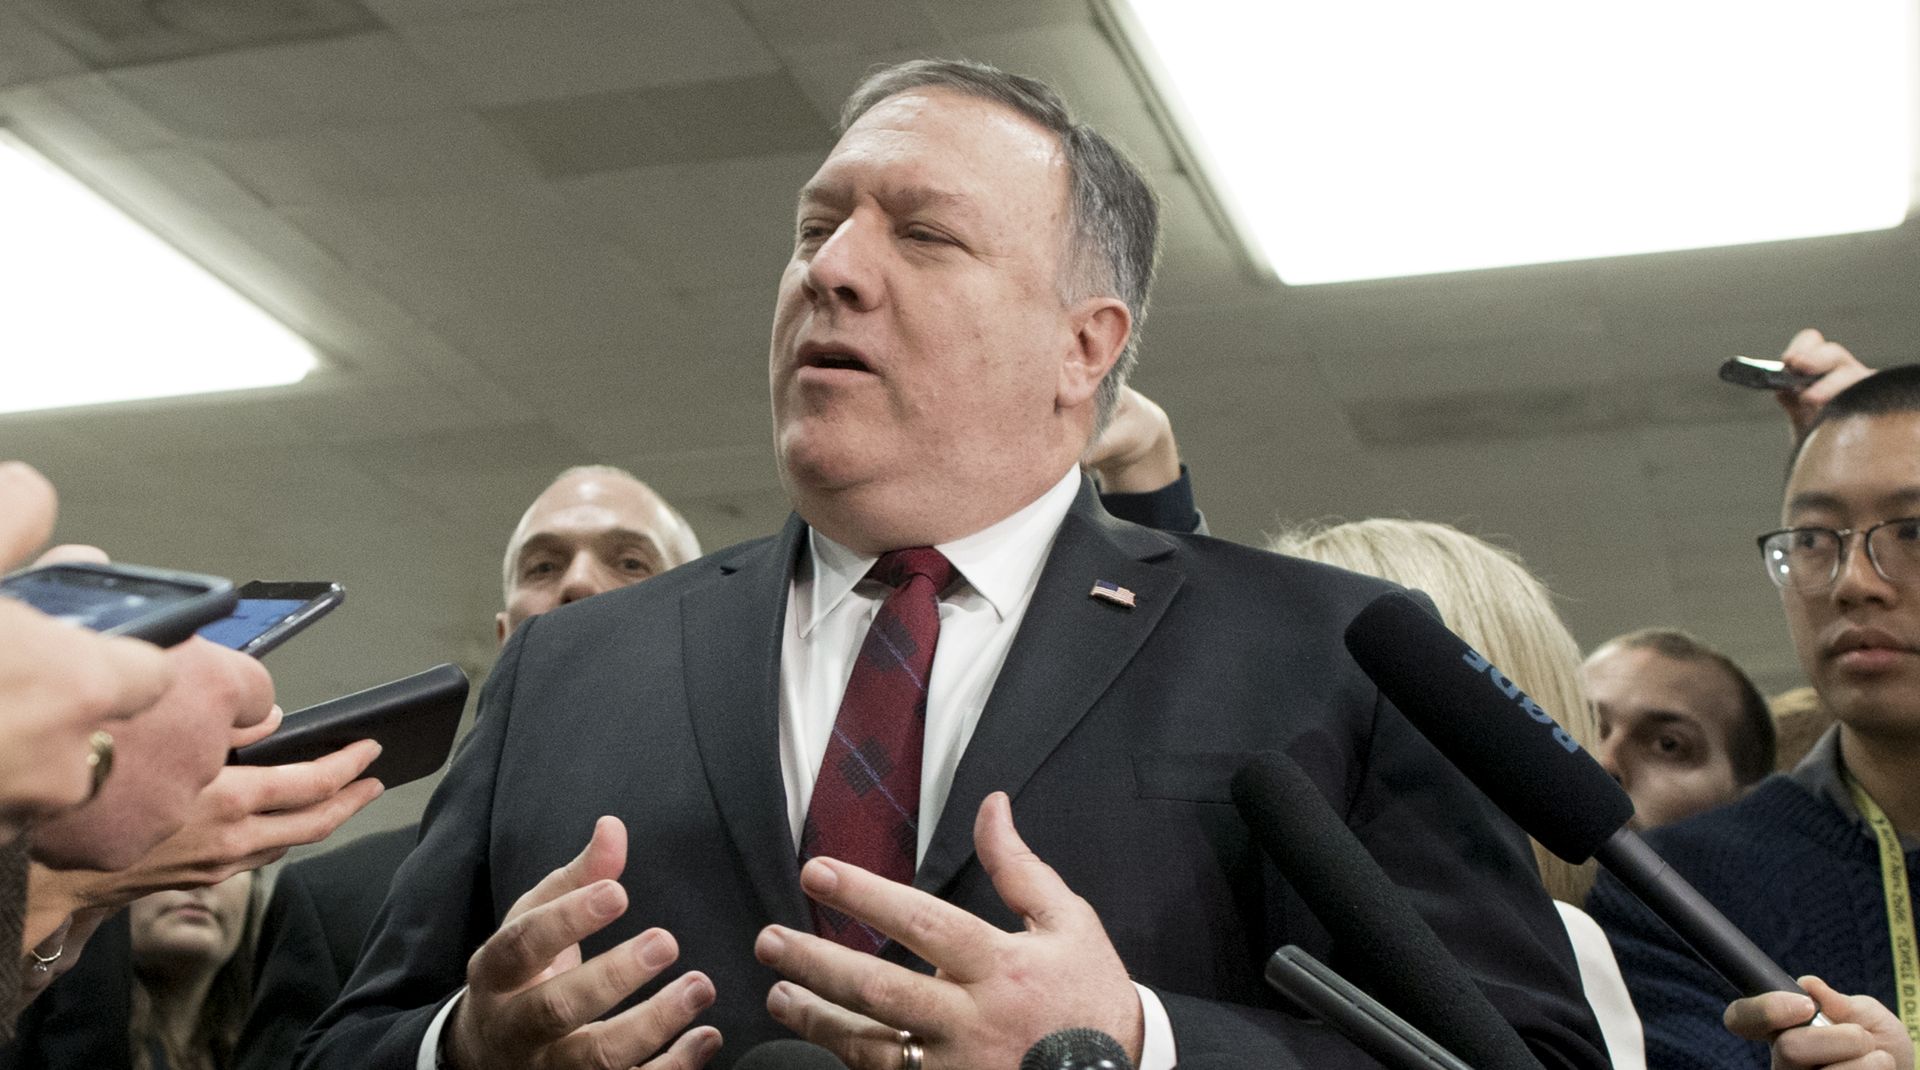 epa07195530 US Secretary of State Mike Pompeo (C) speaks to members of the news media following a closed briefing for US senators on Saudi Arabia, on Capitol Hill in Washington, DC, USA, 28 November 2018. Members of the US Senate attended a briefing by US Secretary of State Mike Pompeo and US Secretary of Defense Jim Mattis on developments relating to Saudi Arabia. The Senate is expected to consider a resolution co-sponsored by Independent Senator from Vermont Bernie Sanders and Republican Senator from Utah Mike Lee that would stop US support of Saudi Arabia's involvement in conflict in Yemen following the death of Washington Post contributor Jamal Khashoggi.  EPA/MICHAEL REYNOLDS